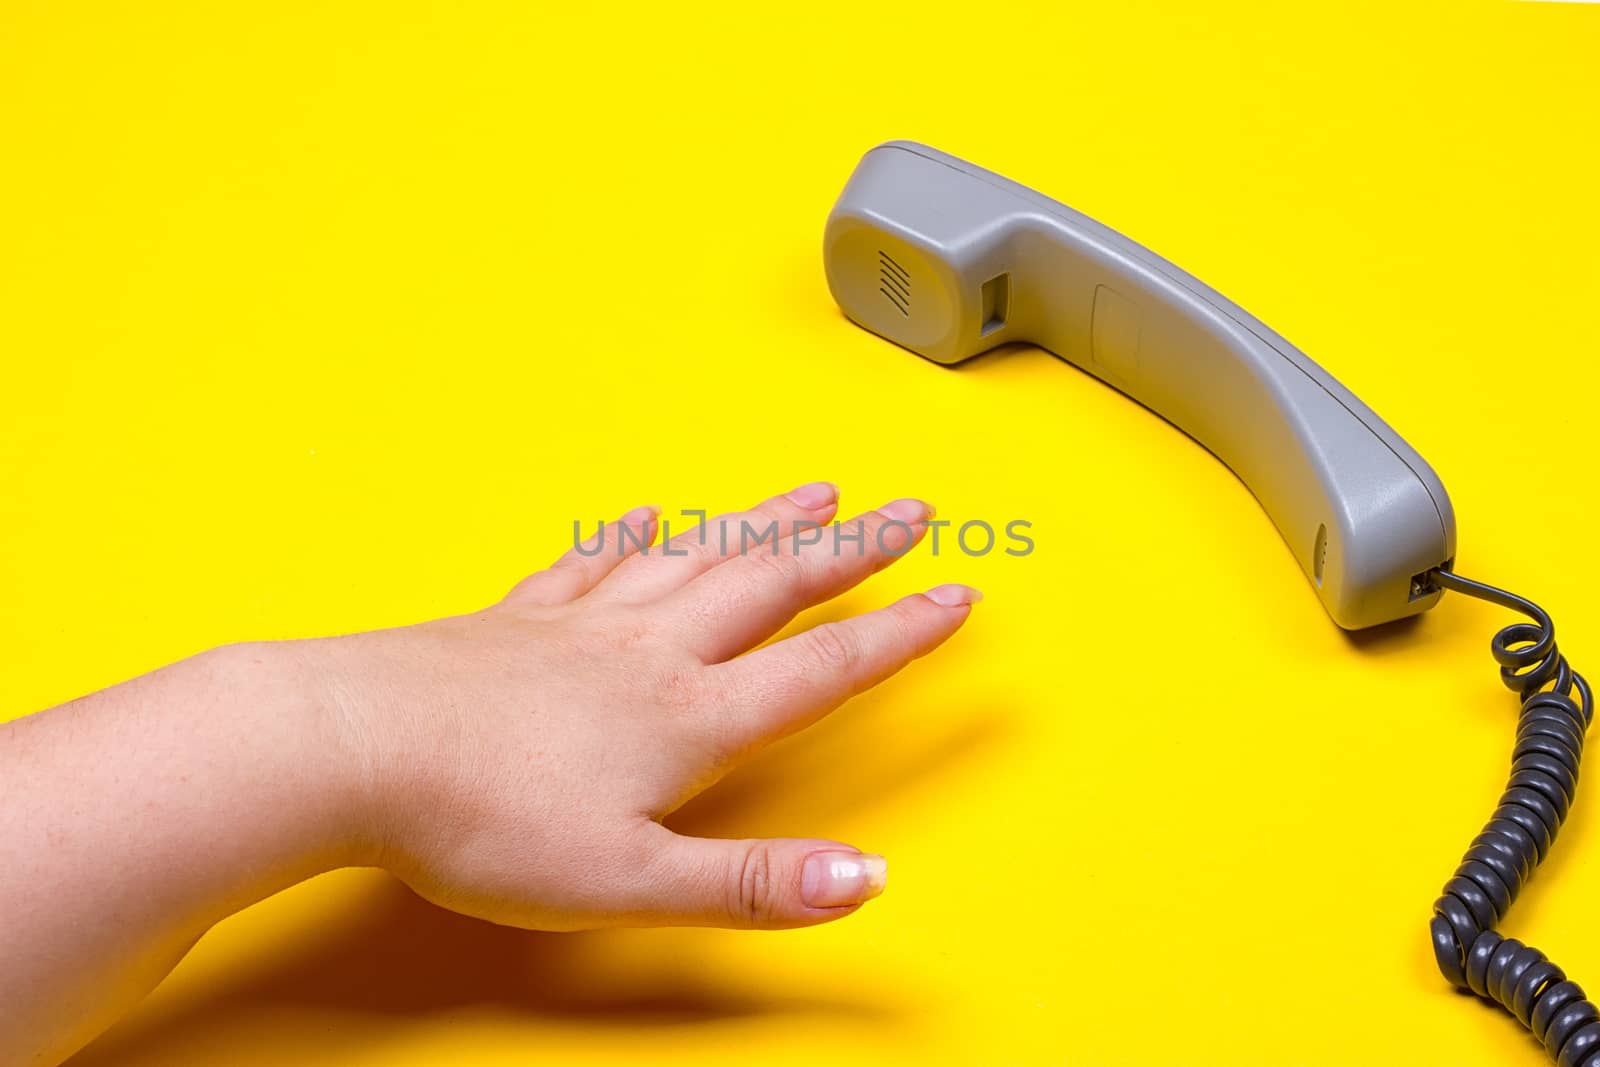 female hand lies next to the telephone receiver on the wire on a yellow background